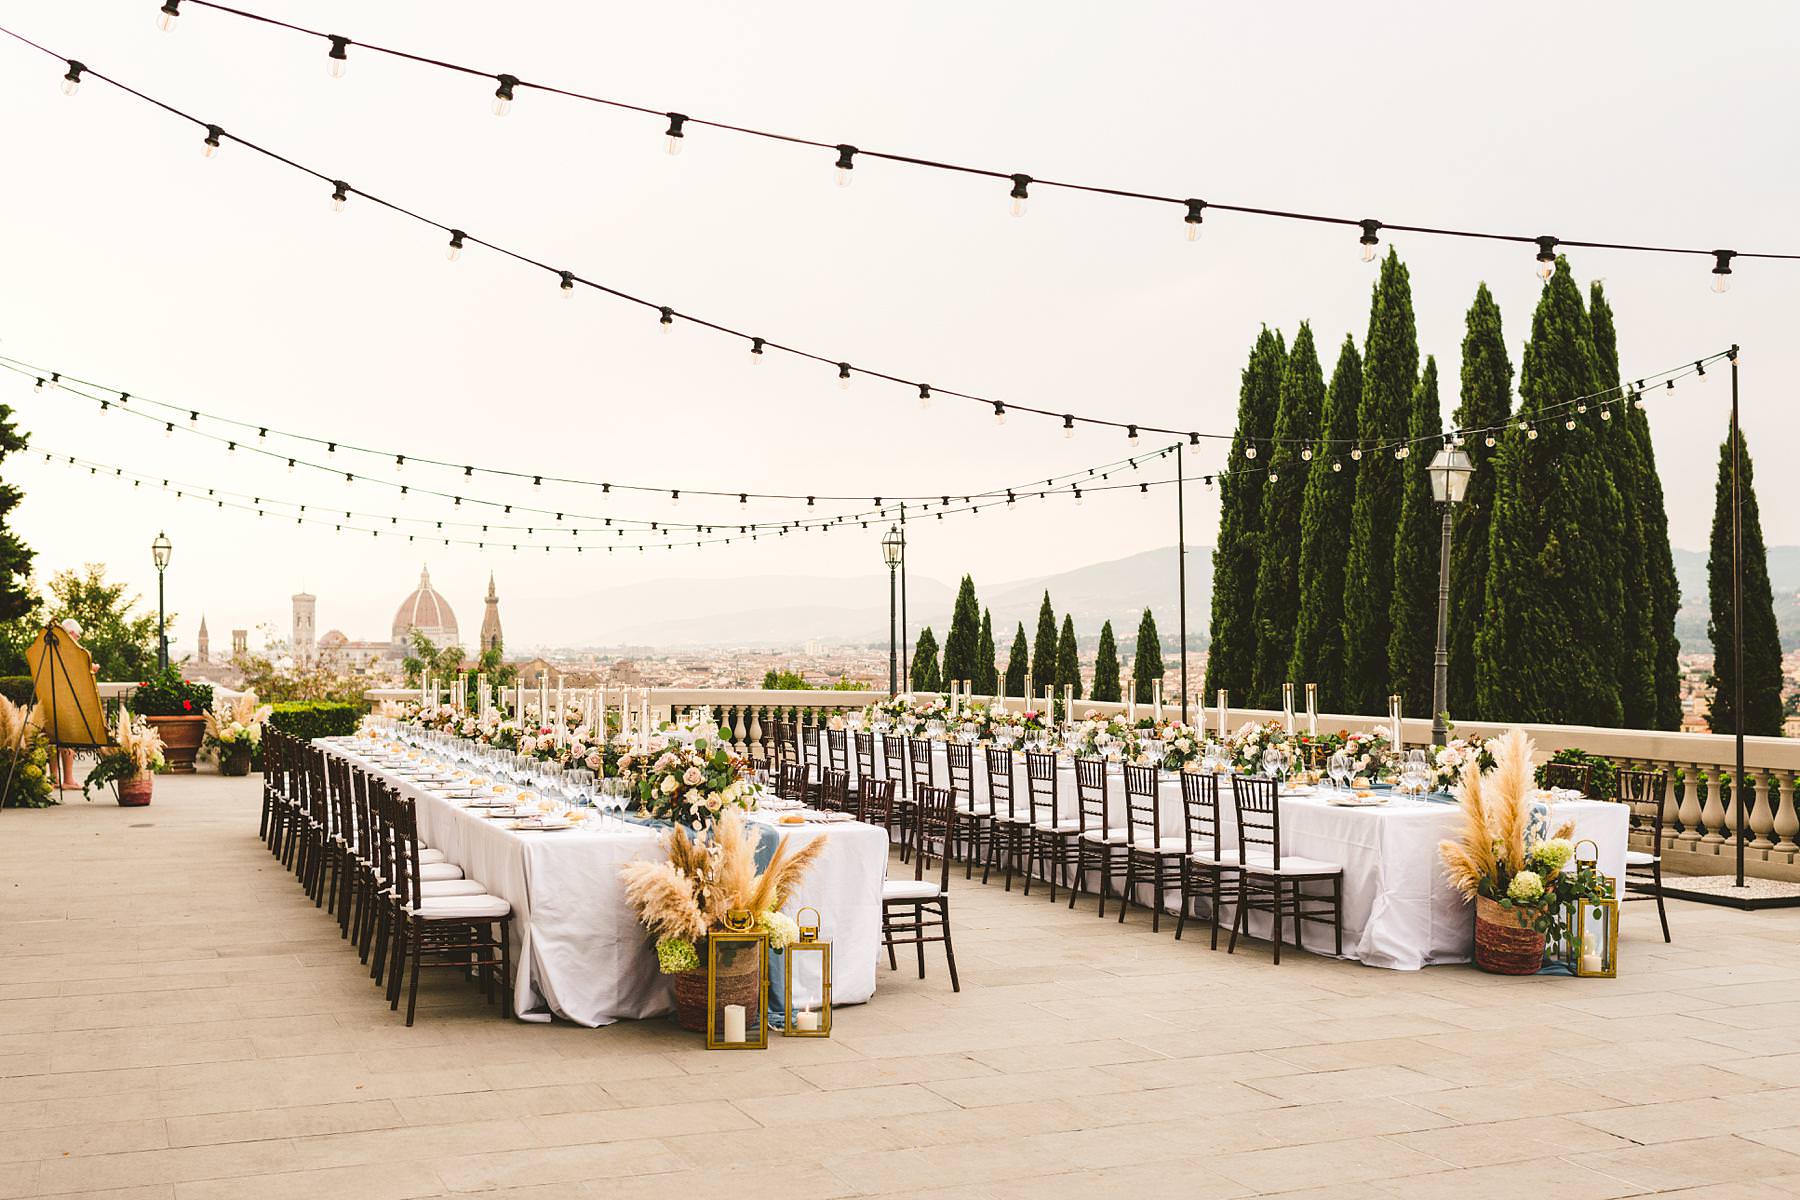 Luxury wedding with amazing view at Villa La Vedetta in Florence. Intimate luxury destination wedding dinner decoration by Stiatti Fiori and Villa La Vedetta. Every details was spotless and delightful, contributing to creating the luxury wedding bride and groom had been dreaming of